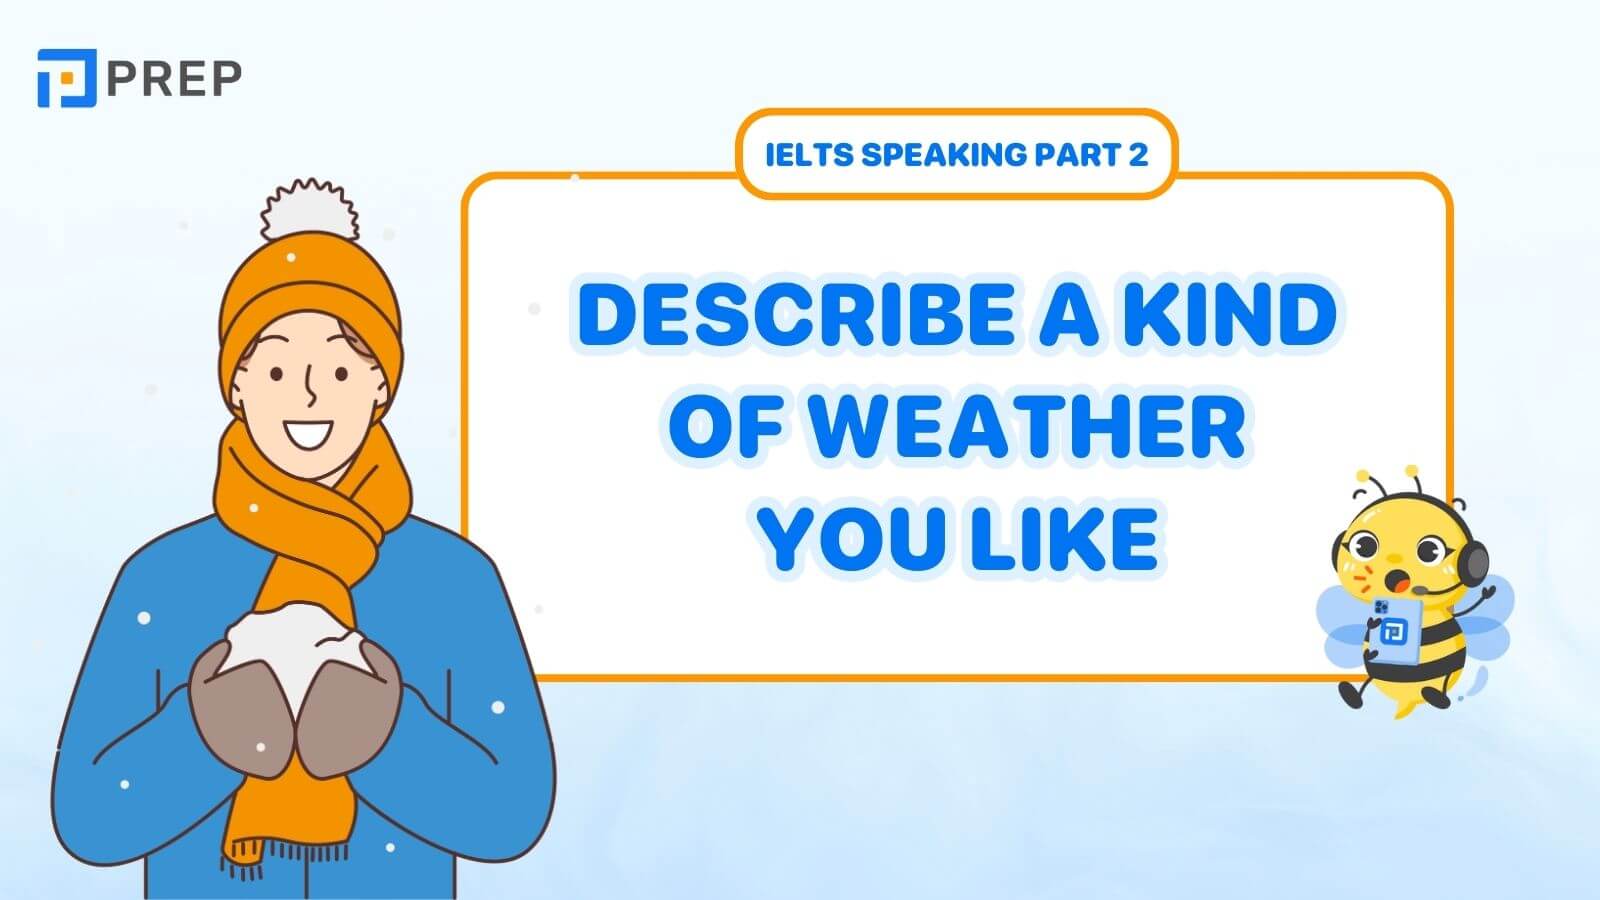 Describe a kind of weather you like